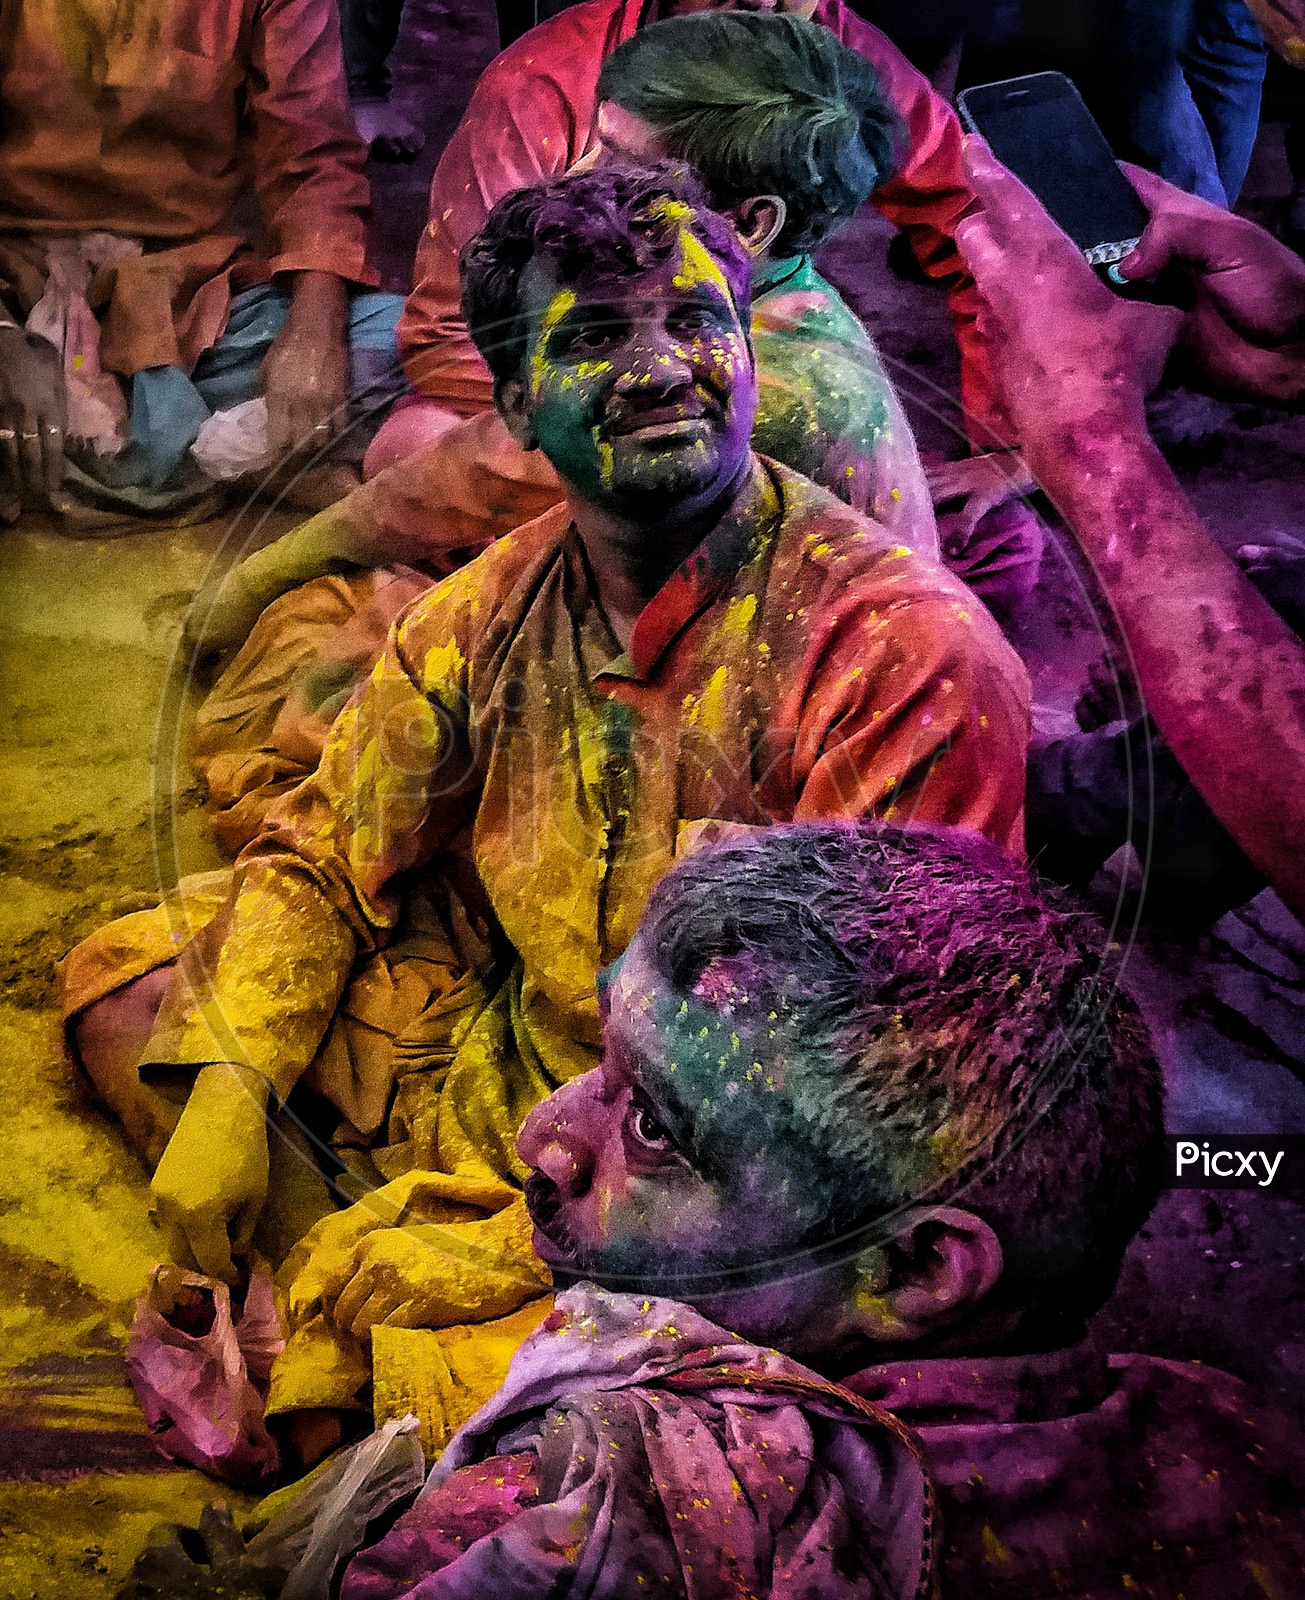 THREE HAPPY SOUL--The One who is happy to click his expression while the Holi player (second person) is happy to pose for him.this is the reason why I love the Holi in barsana, Uttar Pradesh,India